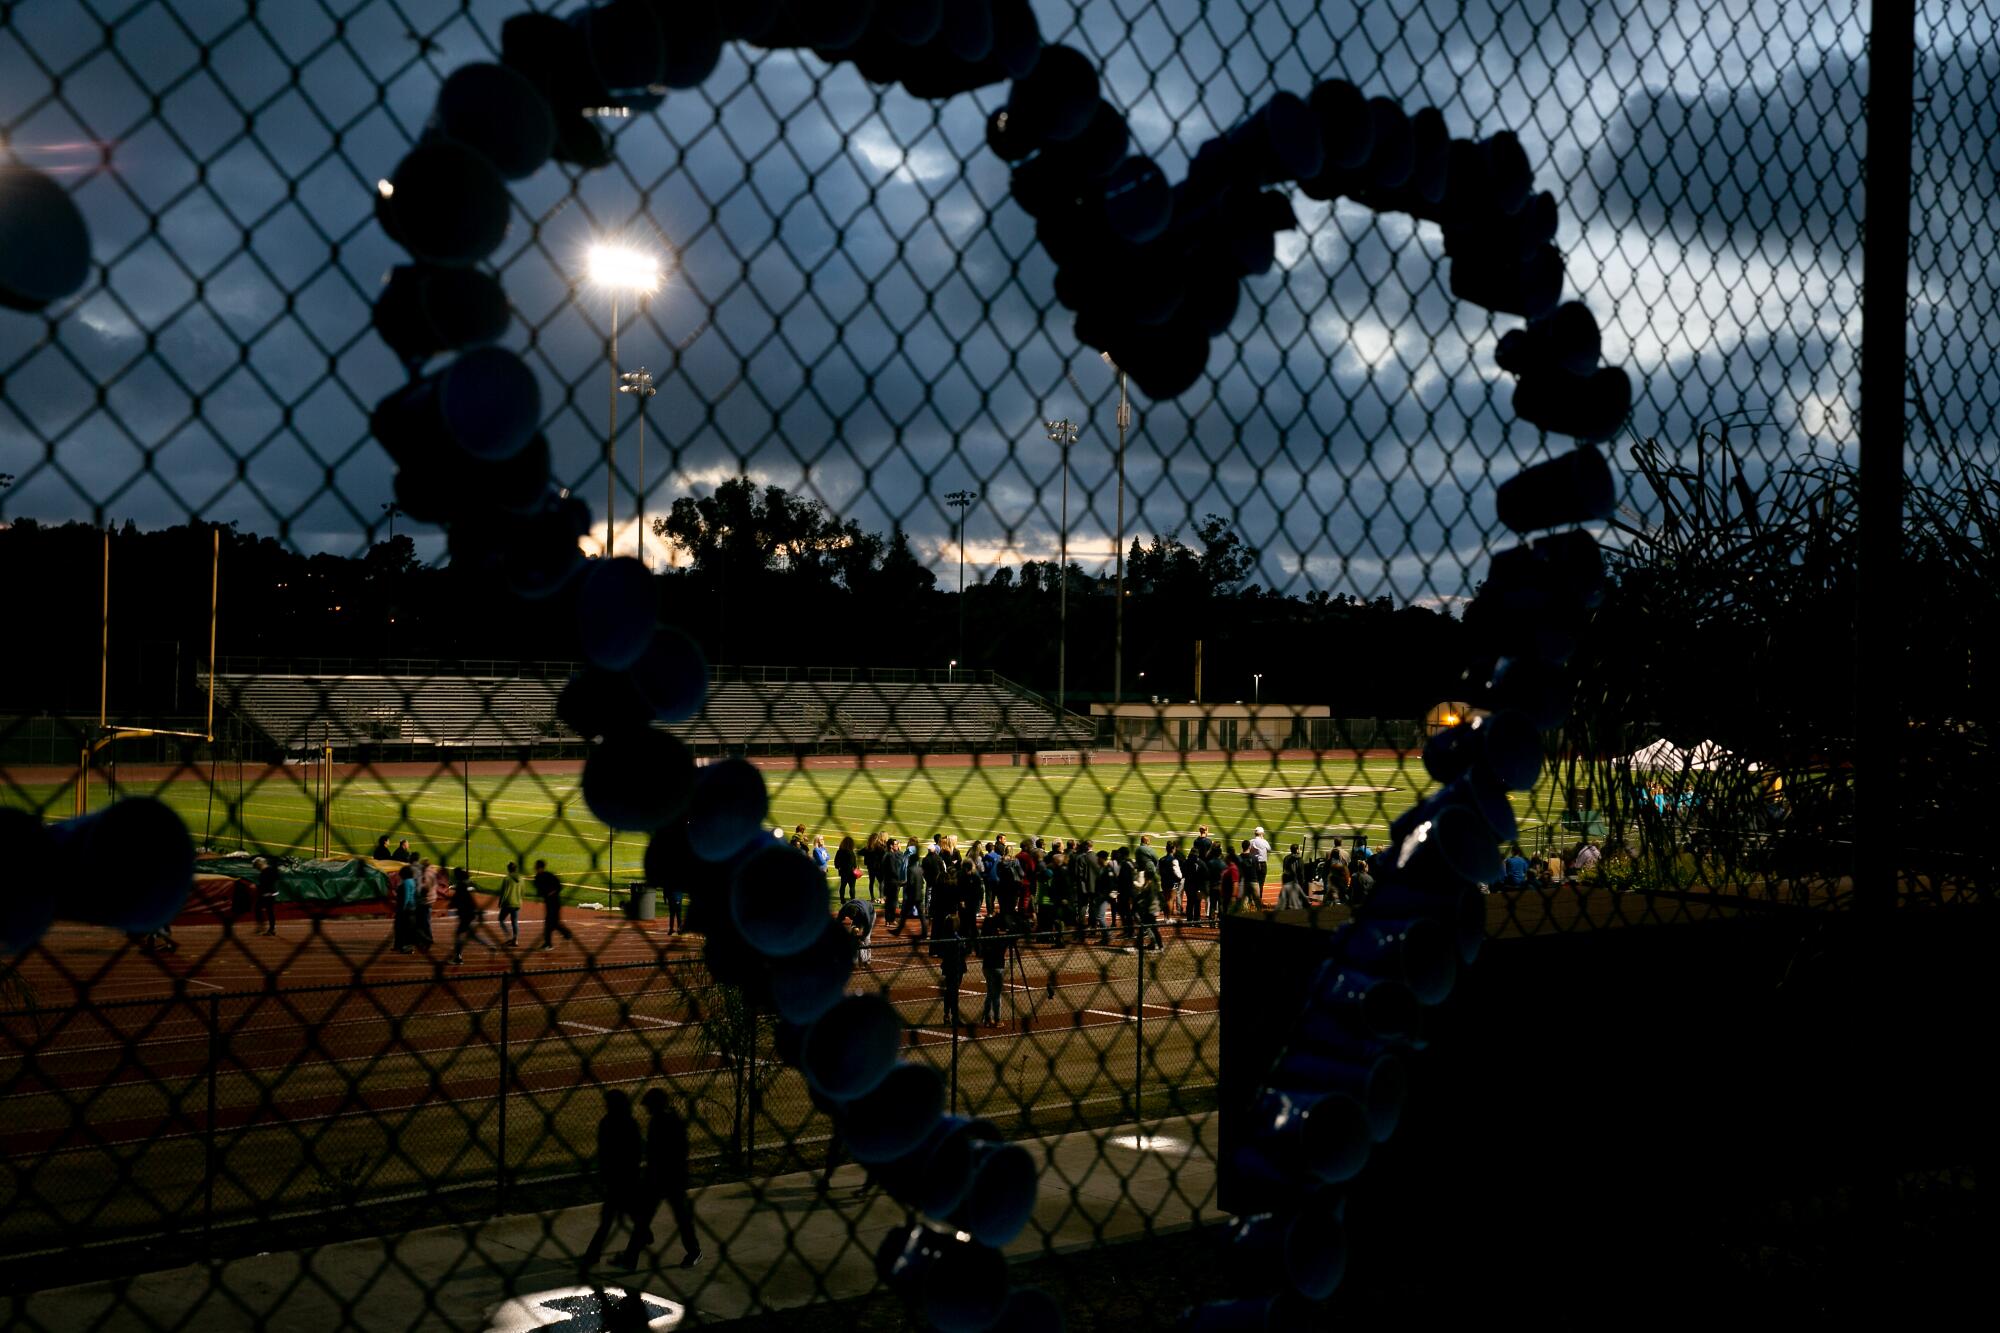 Community members gather at Poway High School on April 29, 2019, for a vigil following the shooting at Chabad of Poway.